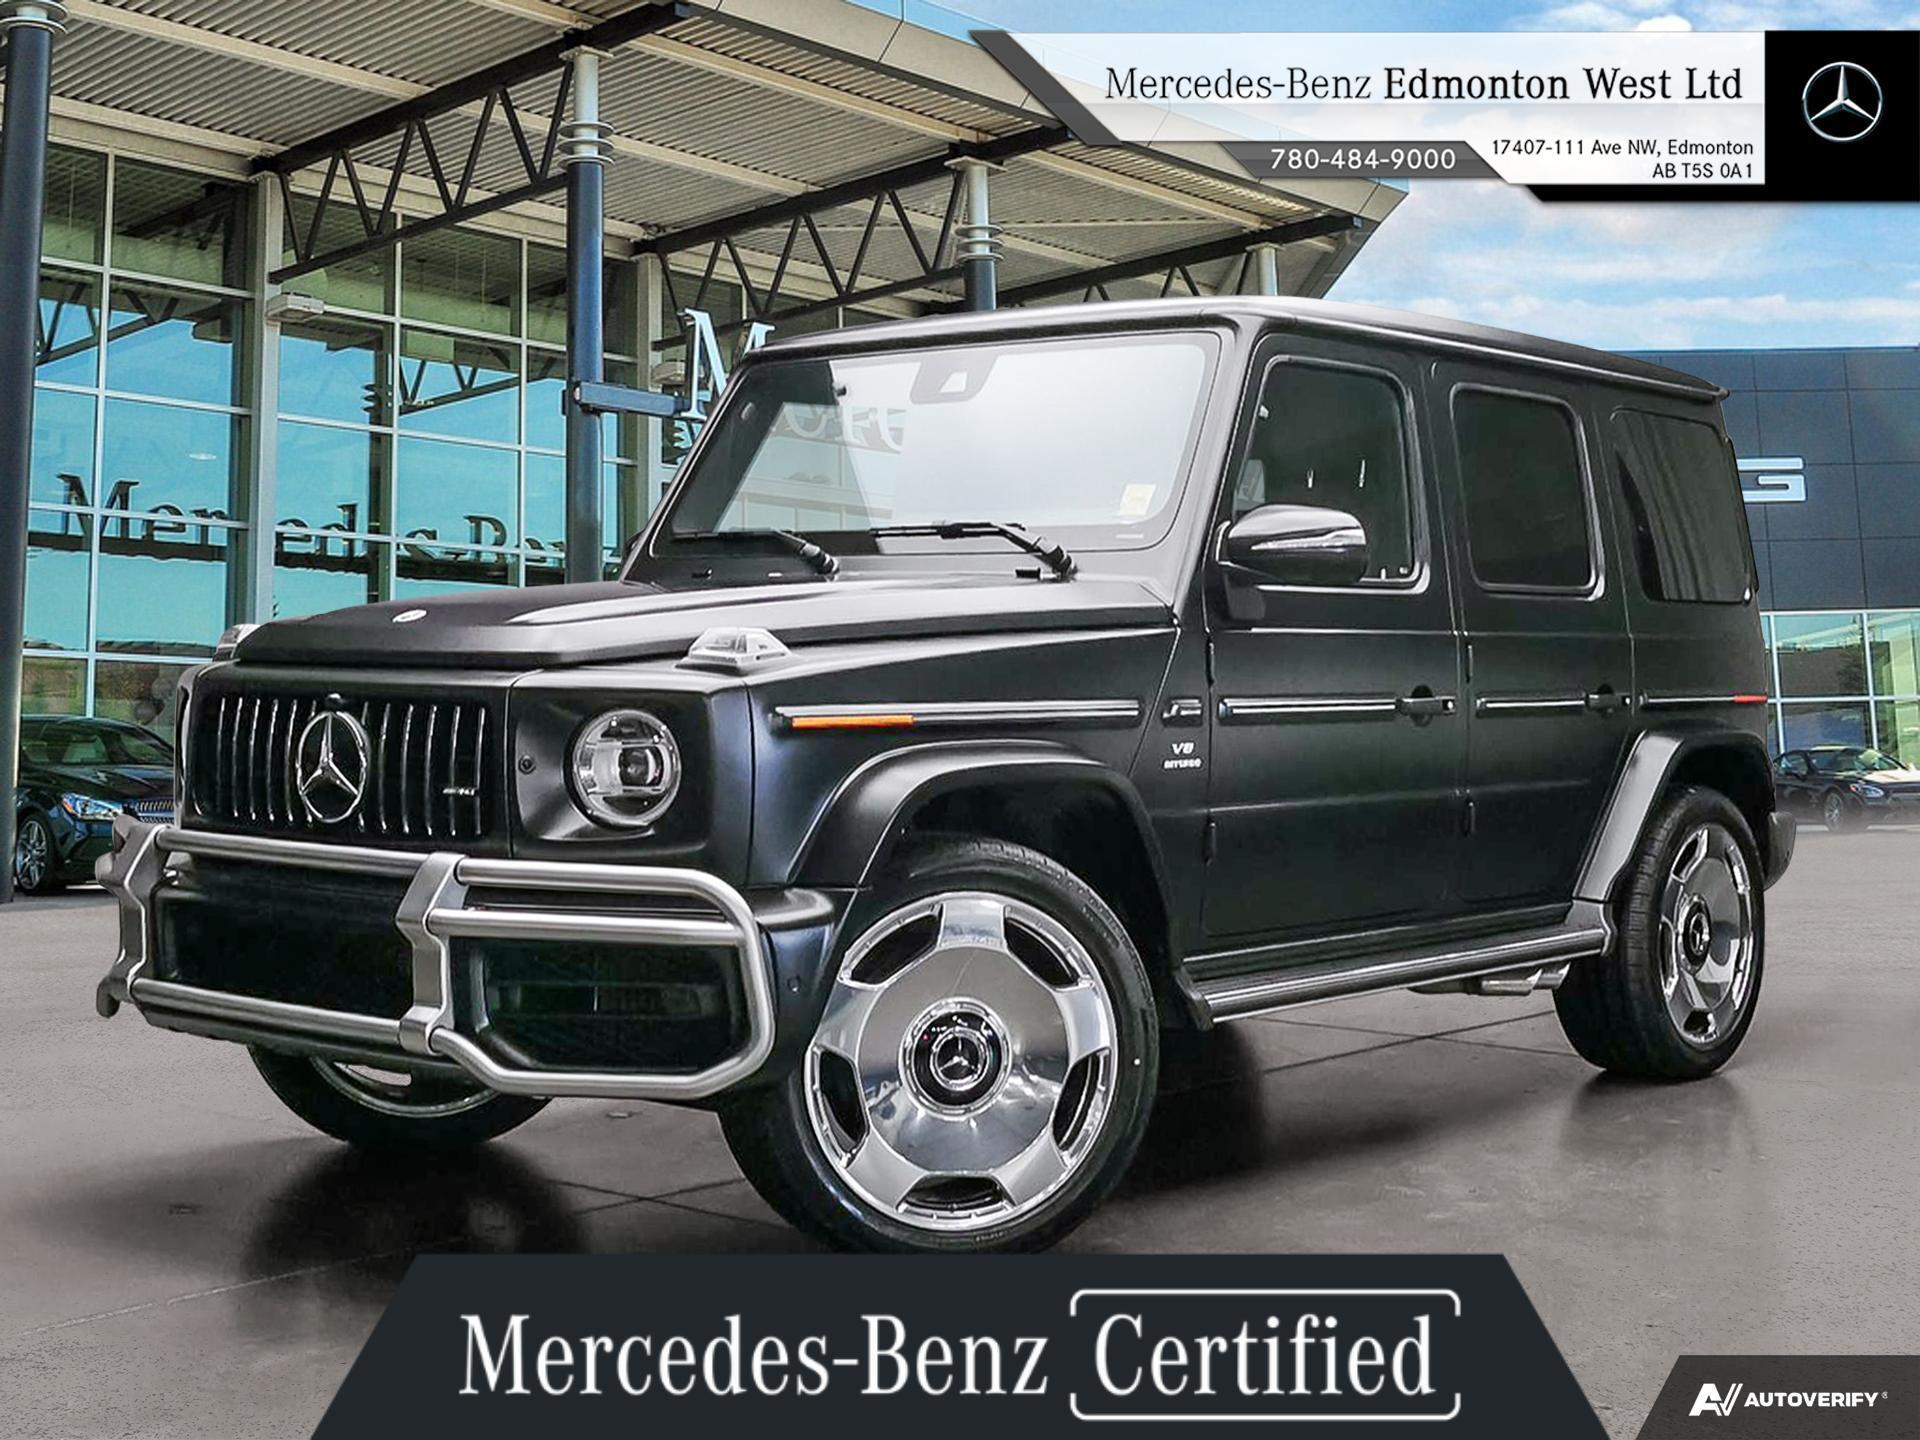 2023 Mercedes-Benz G-Class AMG G 63 4MATIC SUV  - Low Kms - $10K Full Xpel Wr